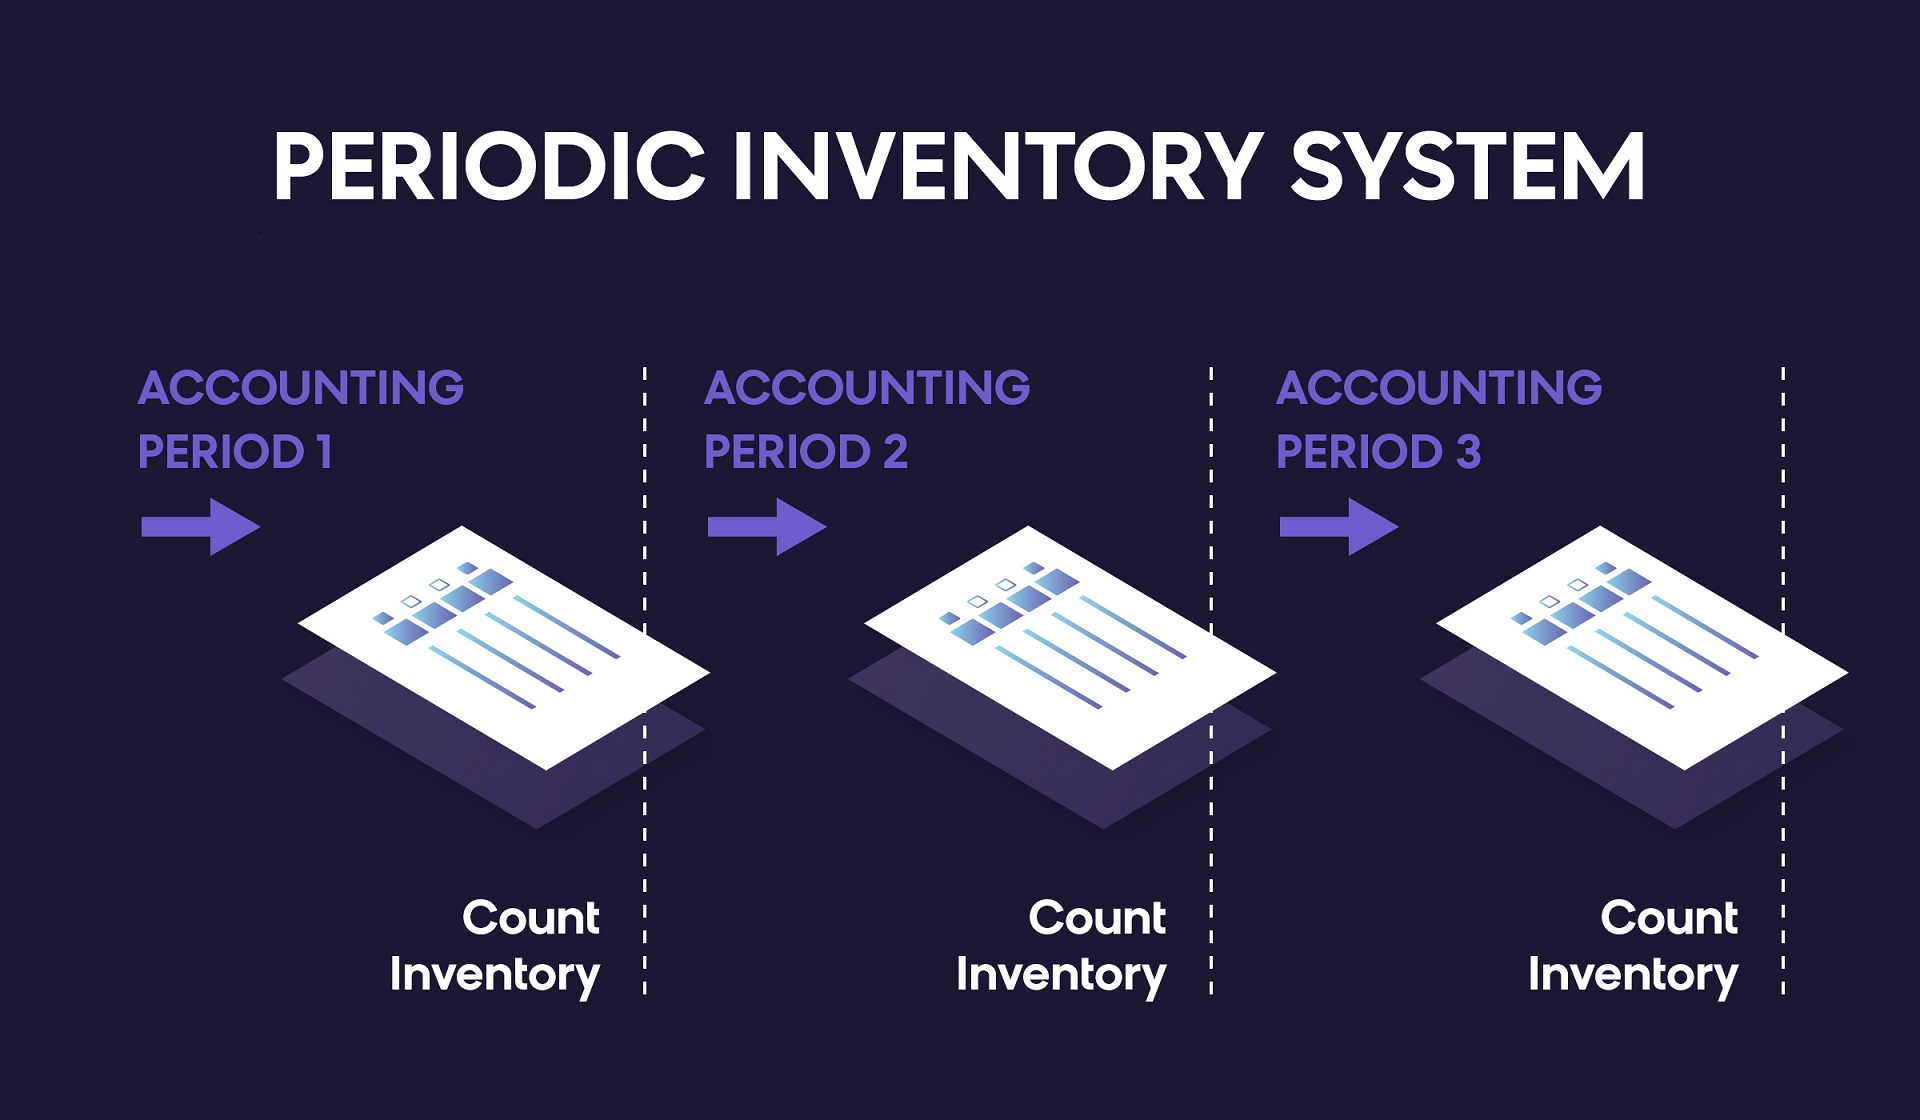 What is a periodic inventory system?